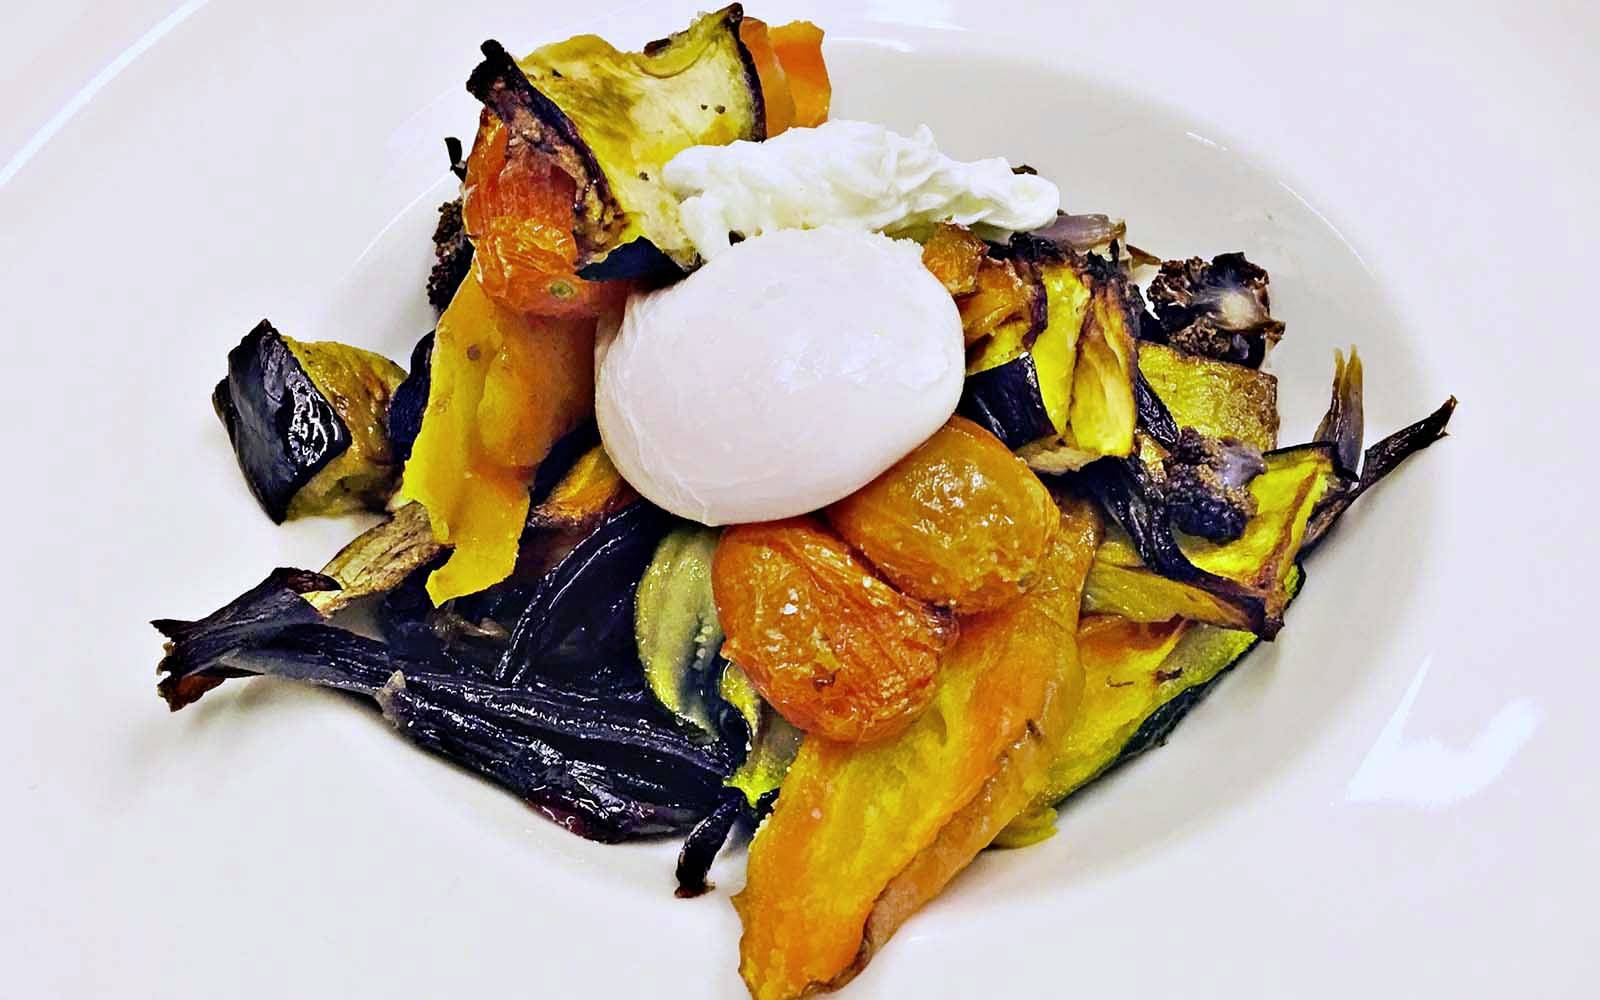 Roasted vegetable salad and poached egg